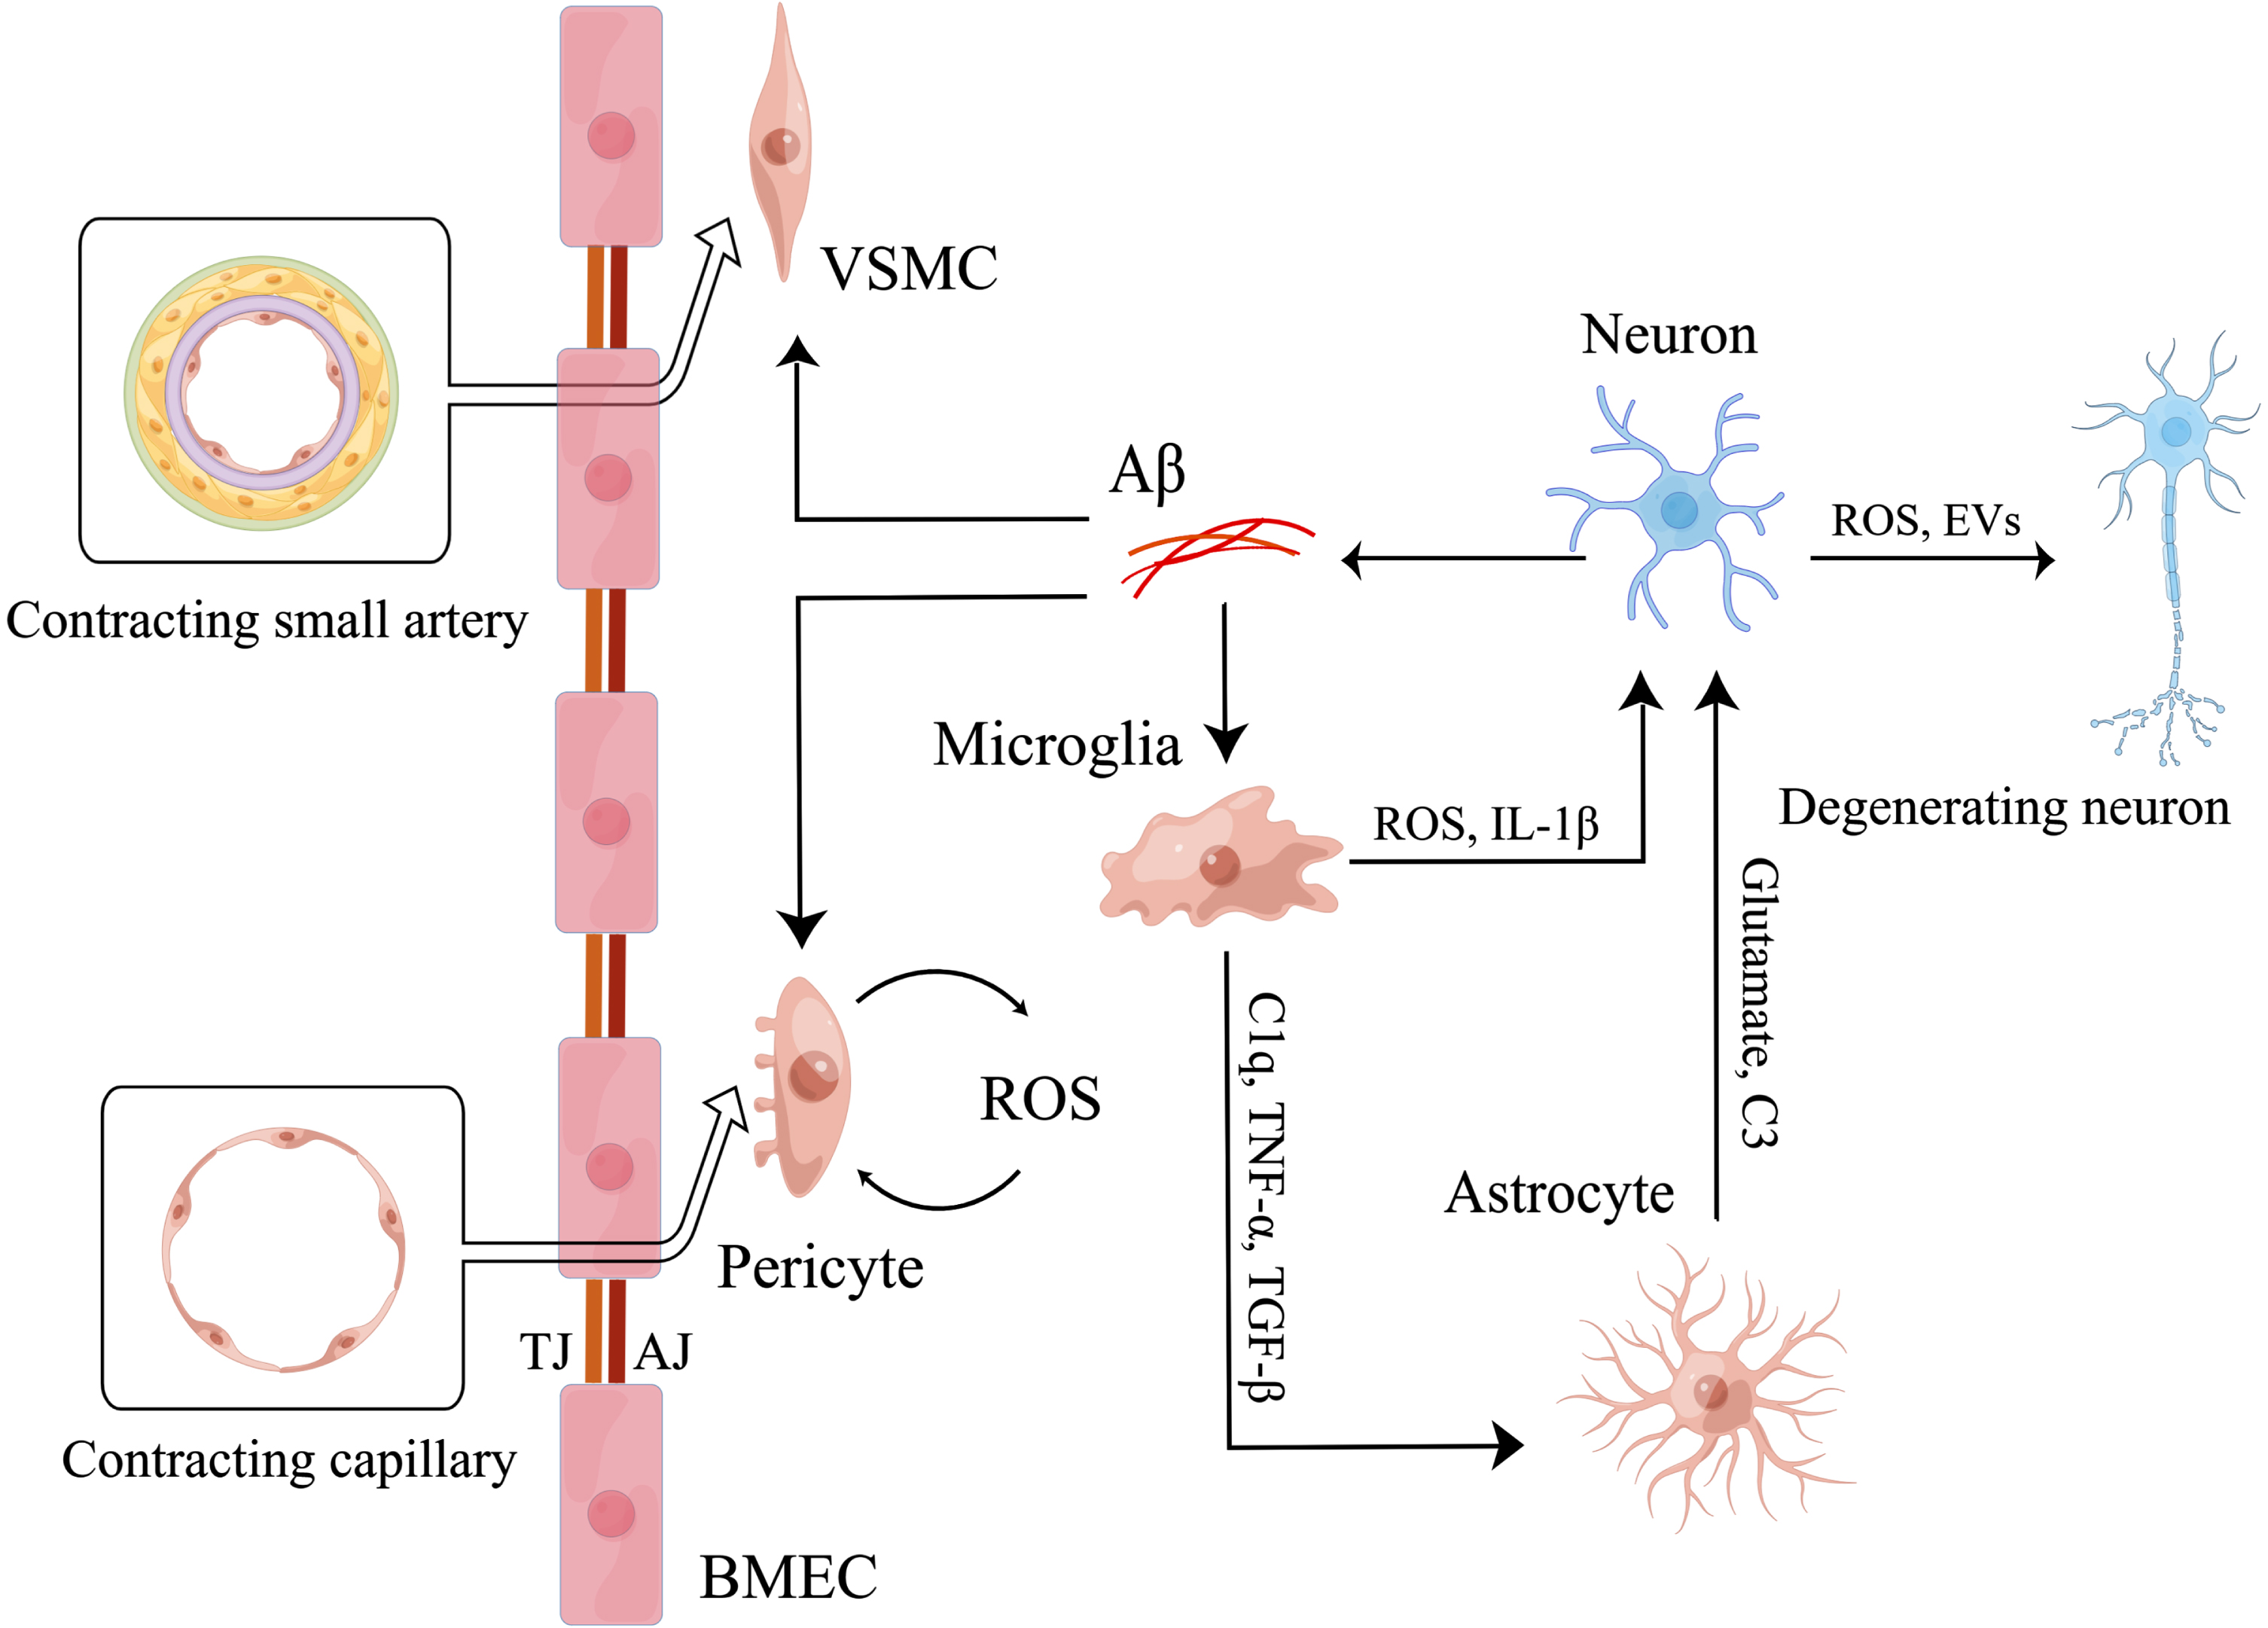 Microglia mediate neurovascular uncoupling. Firstly, microglia induced by Aβ secrete ROS and IL-1β to induce neuronal mitochondrial dysfunction directly. Then, activated microglia also secrete C1q, TNF-α, TGF-β to activate astrocytes. And activated astrocytes increase the release of glutamate and C3 to induce neuronal mitochondrial dysfunction. As a result, neuronal mitochondrial dysfunction induces degeneration of more surrounding neurons by releasing ROS and EVs, finally leading to neurovascular uncoupling. Meanwhile, microglia are involved in the regulation of neurovascular uncoupling by affecting the function of cerebral vessels. Aβ induces abnormal contraction of small arteries by promoting the conversion of VSMCs to hypercontractive phenotype. And Aβ also induces abnormal contraction of capillaries by increasing the release of ROS of pericytes. Eventually, microglia aggravate the effects of Aβ by secreting IL-1β to increase the release of Aβ of neurons.